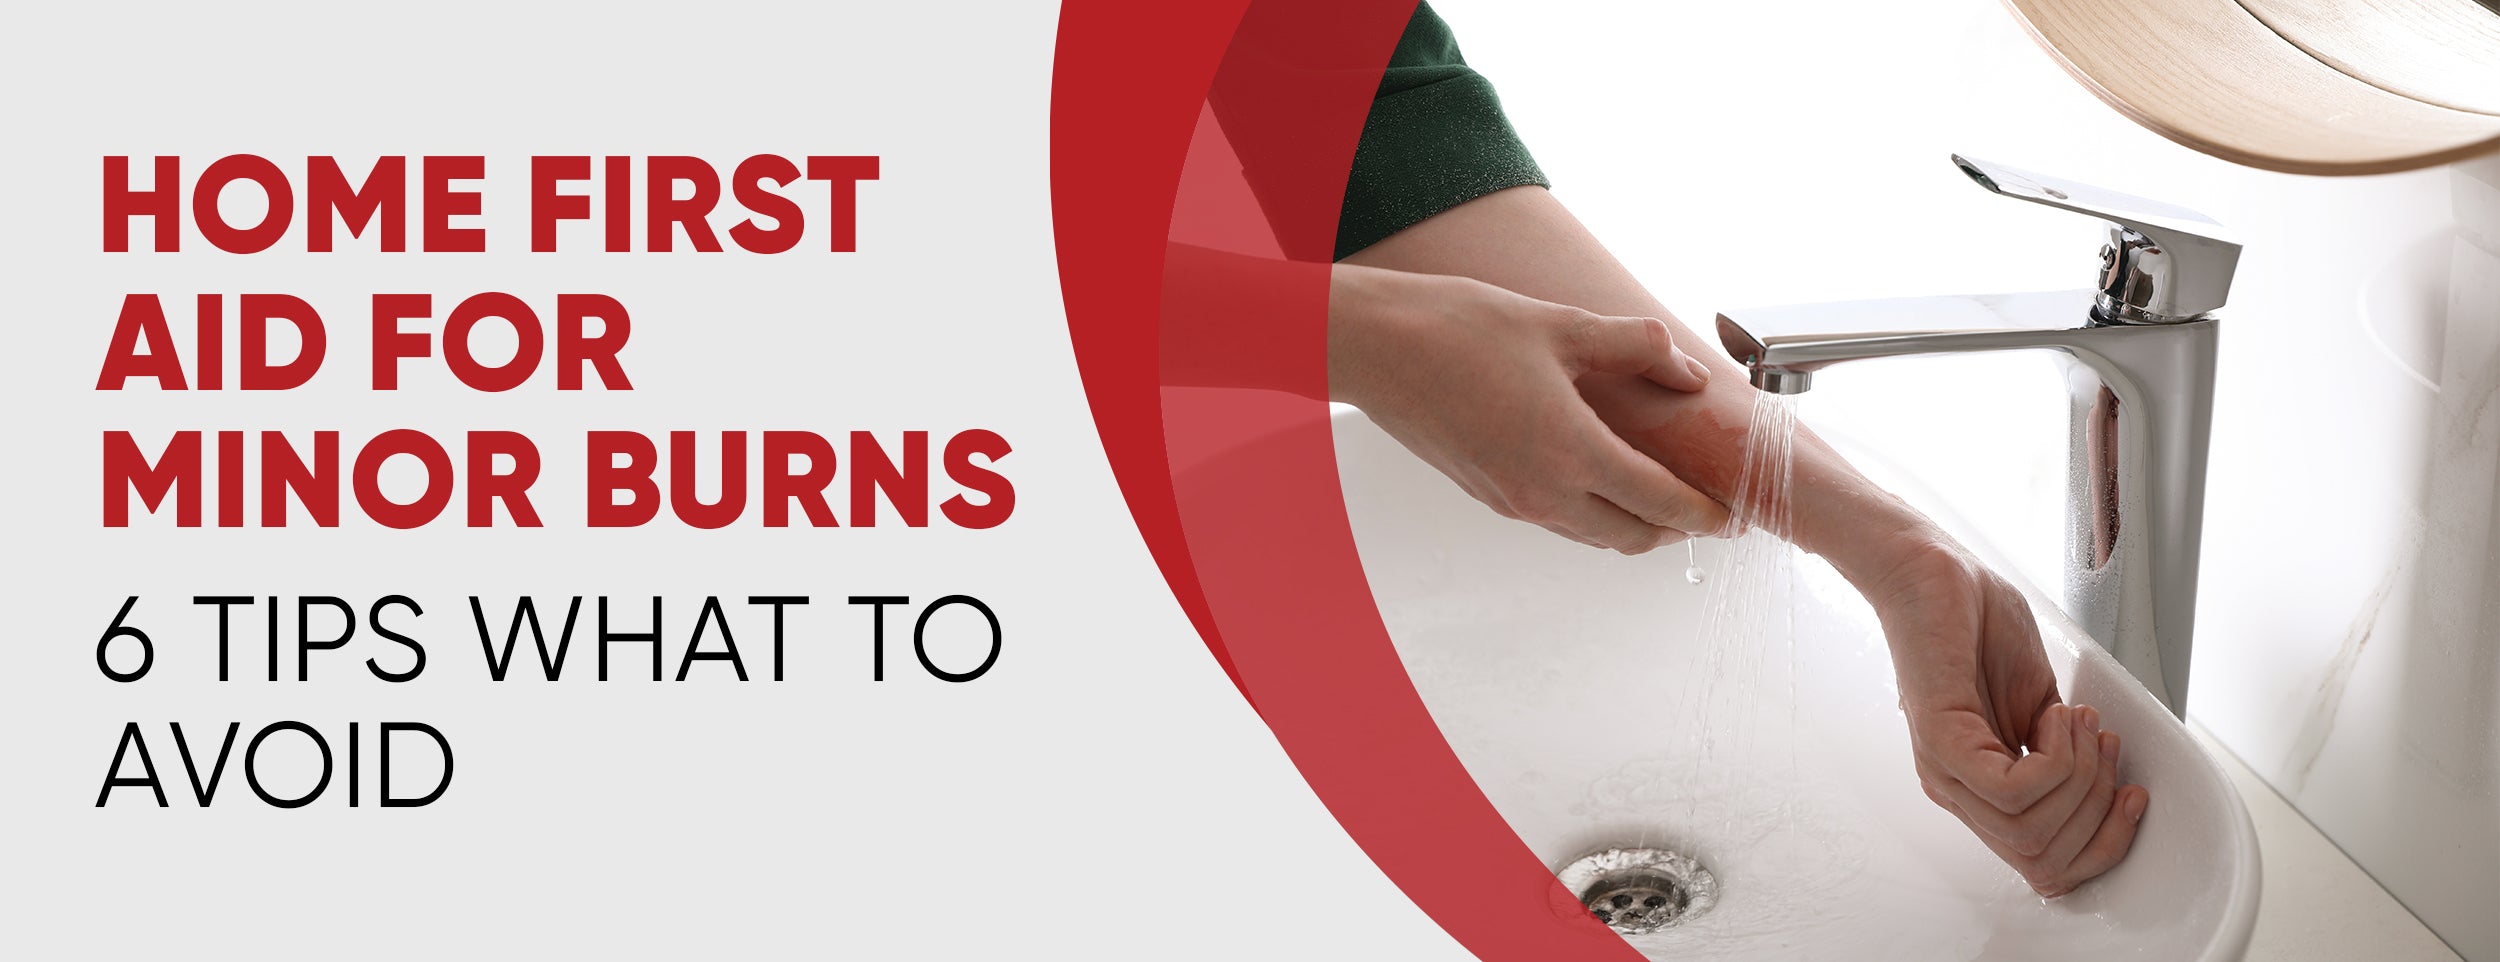 6 Essential Tips for Home First Aid for Minor Burns